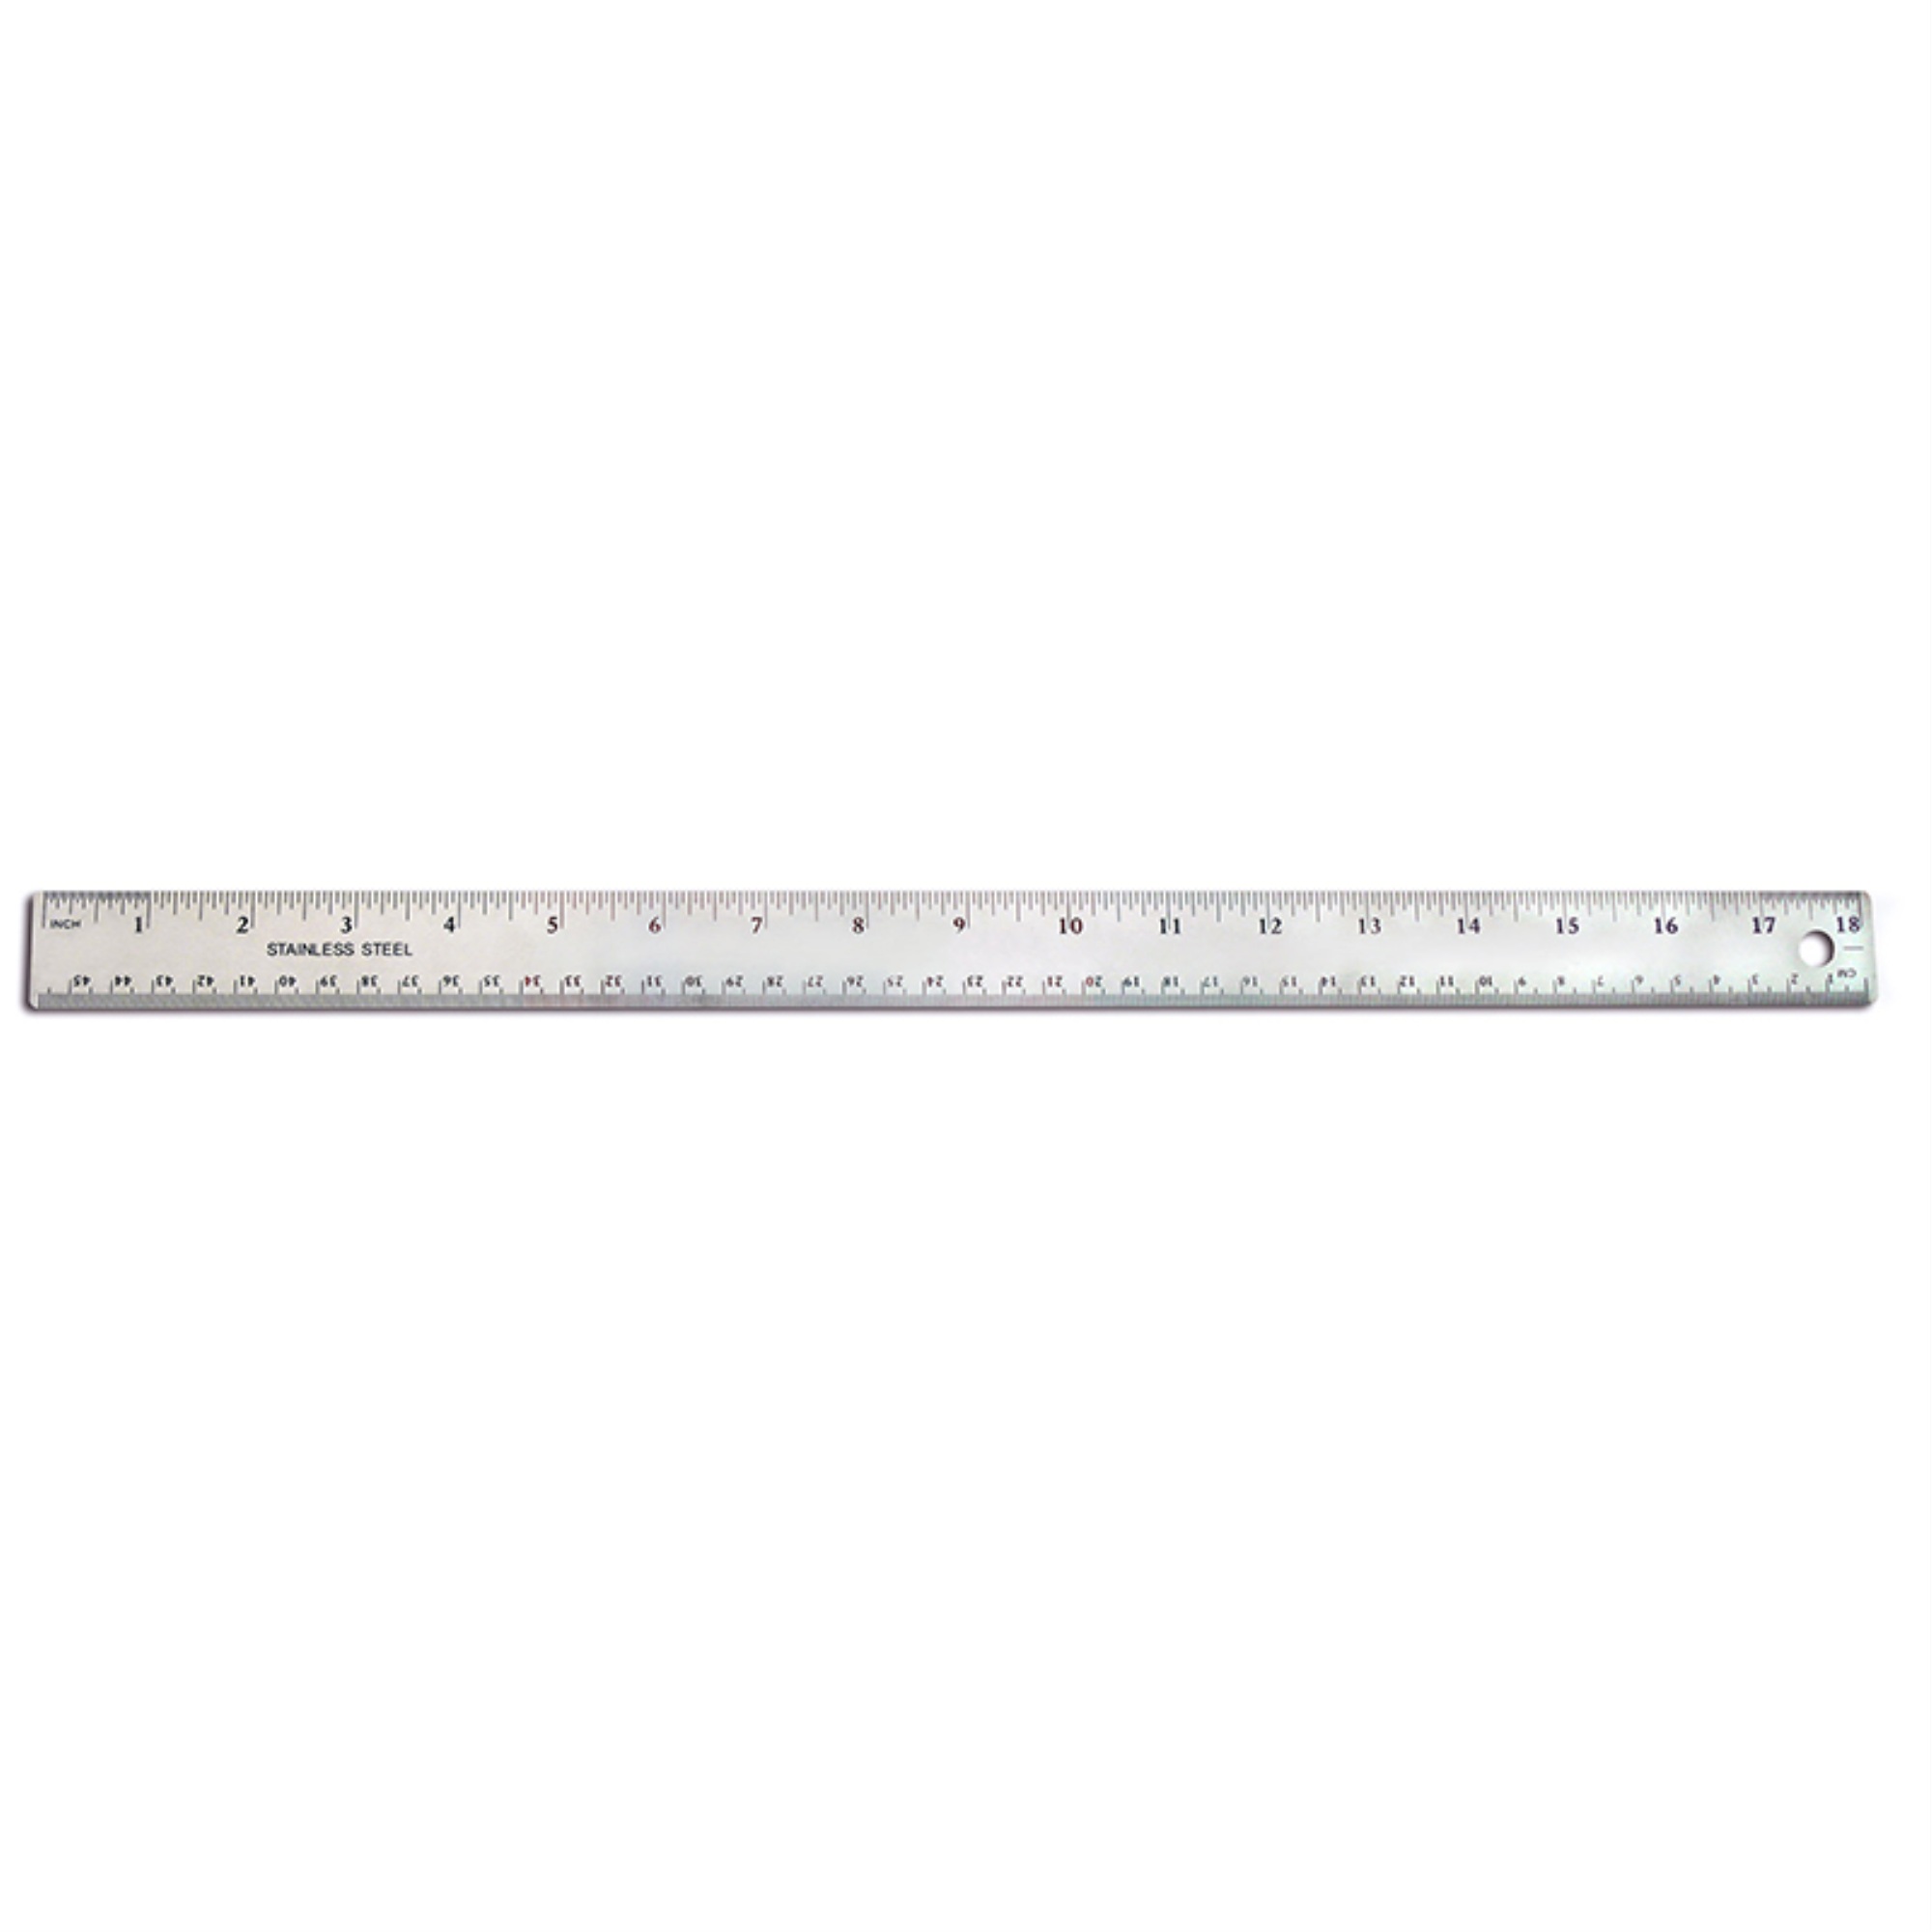 The Pencil Grip Stainless Steel Ruler, 18